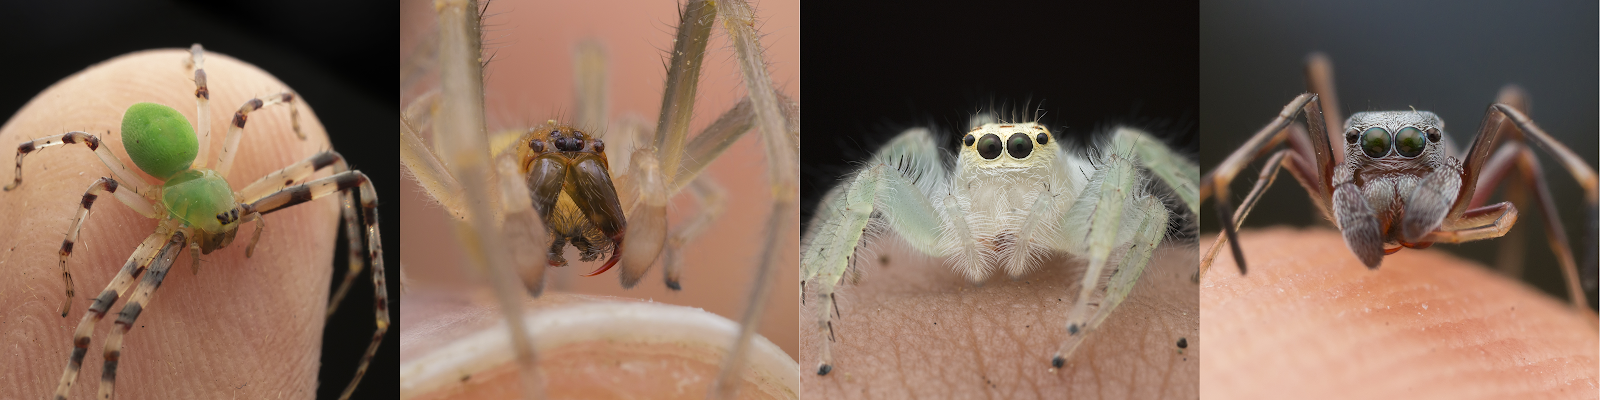 Photographs of spiders on fingertips